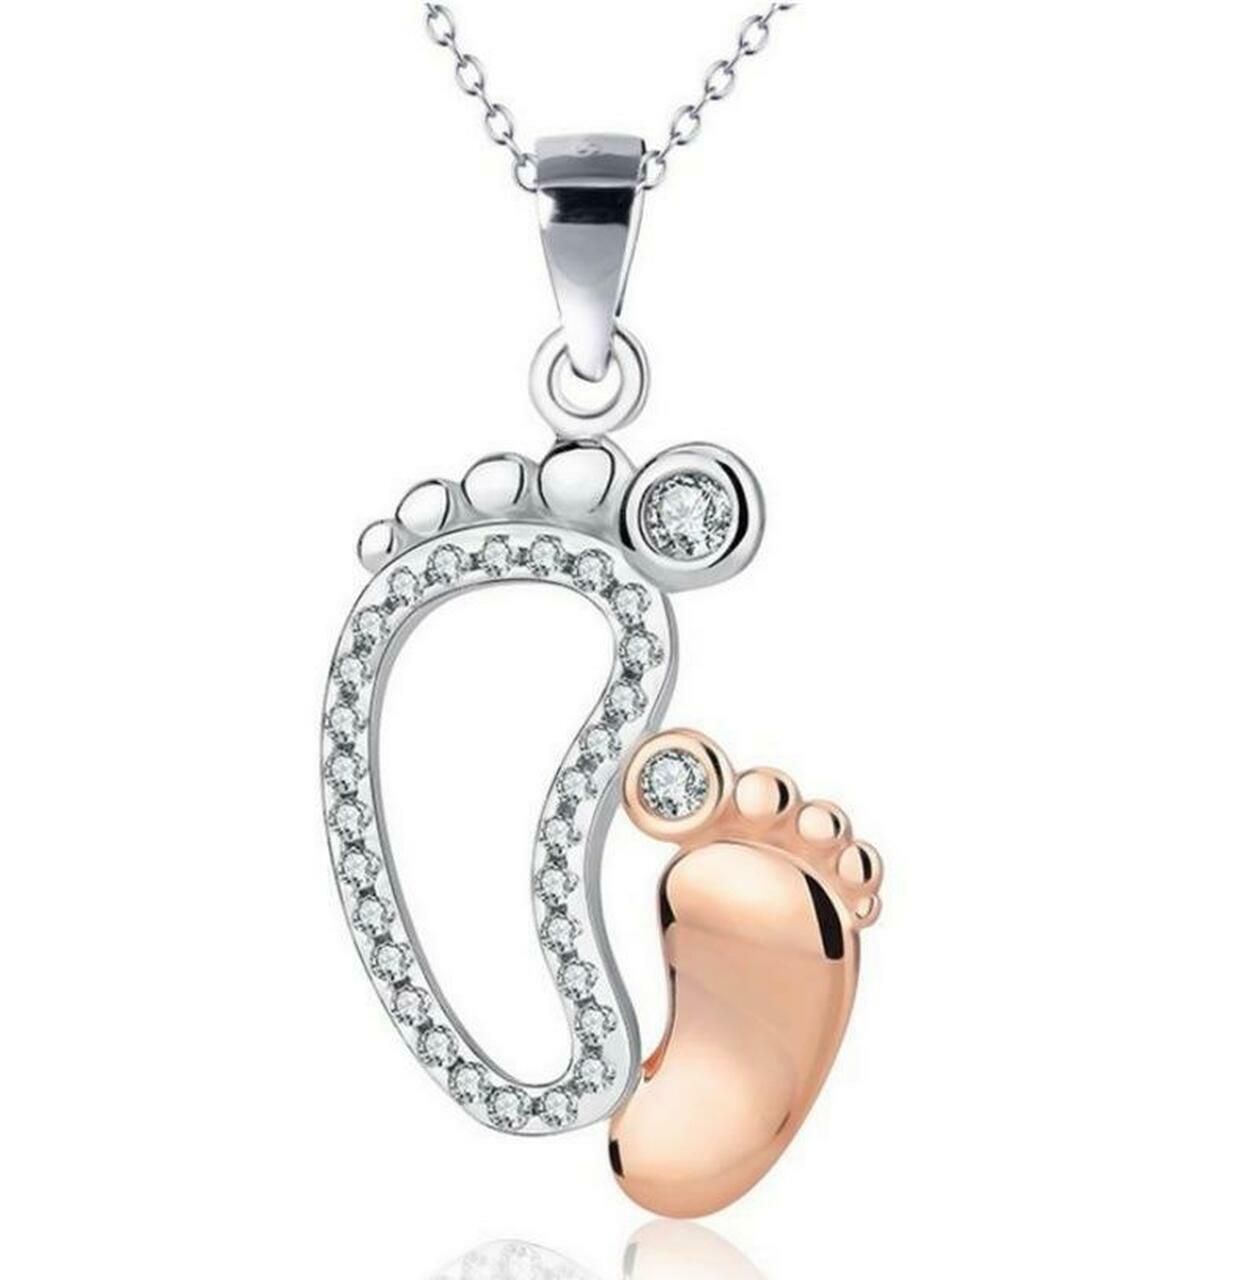 Big and Small Foot Design In 935 Two Tone Argentium Silver With White CZ Pendant